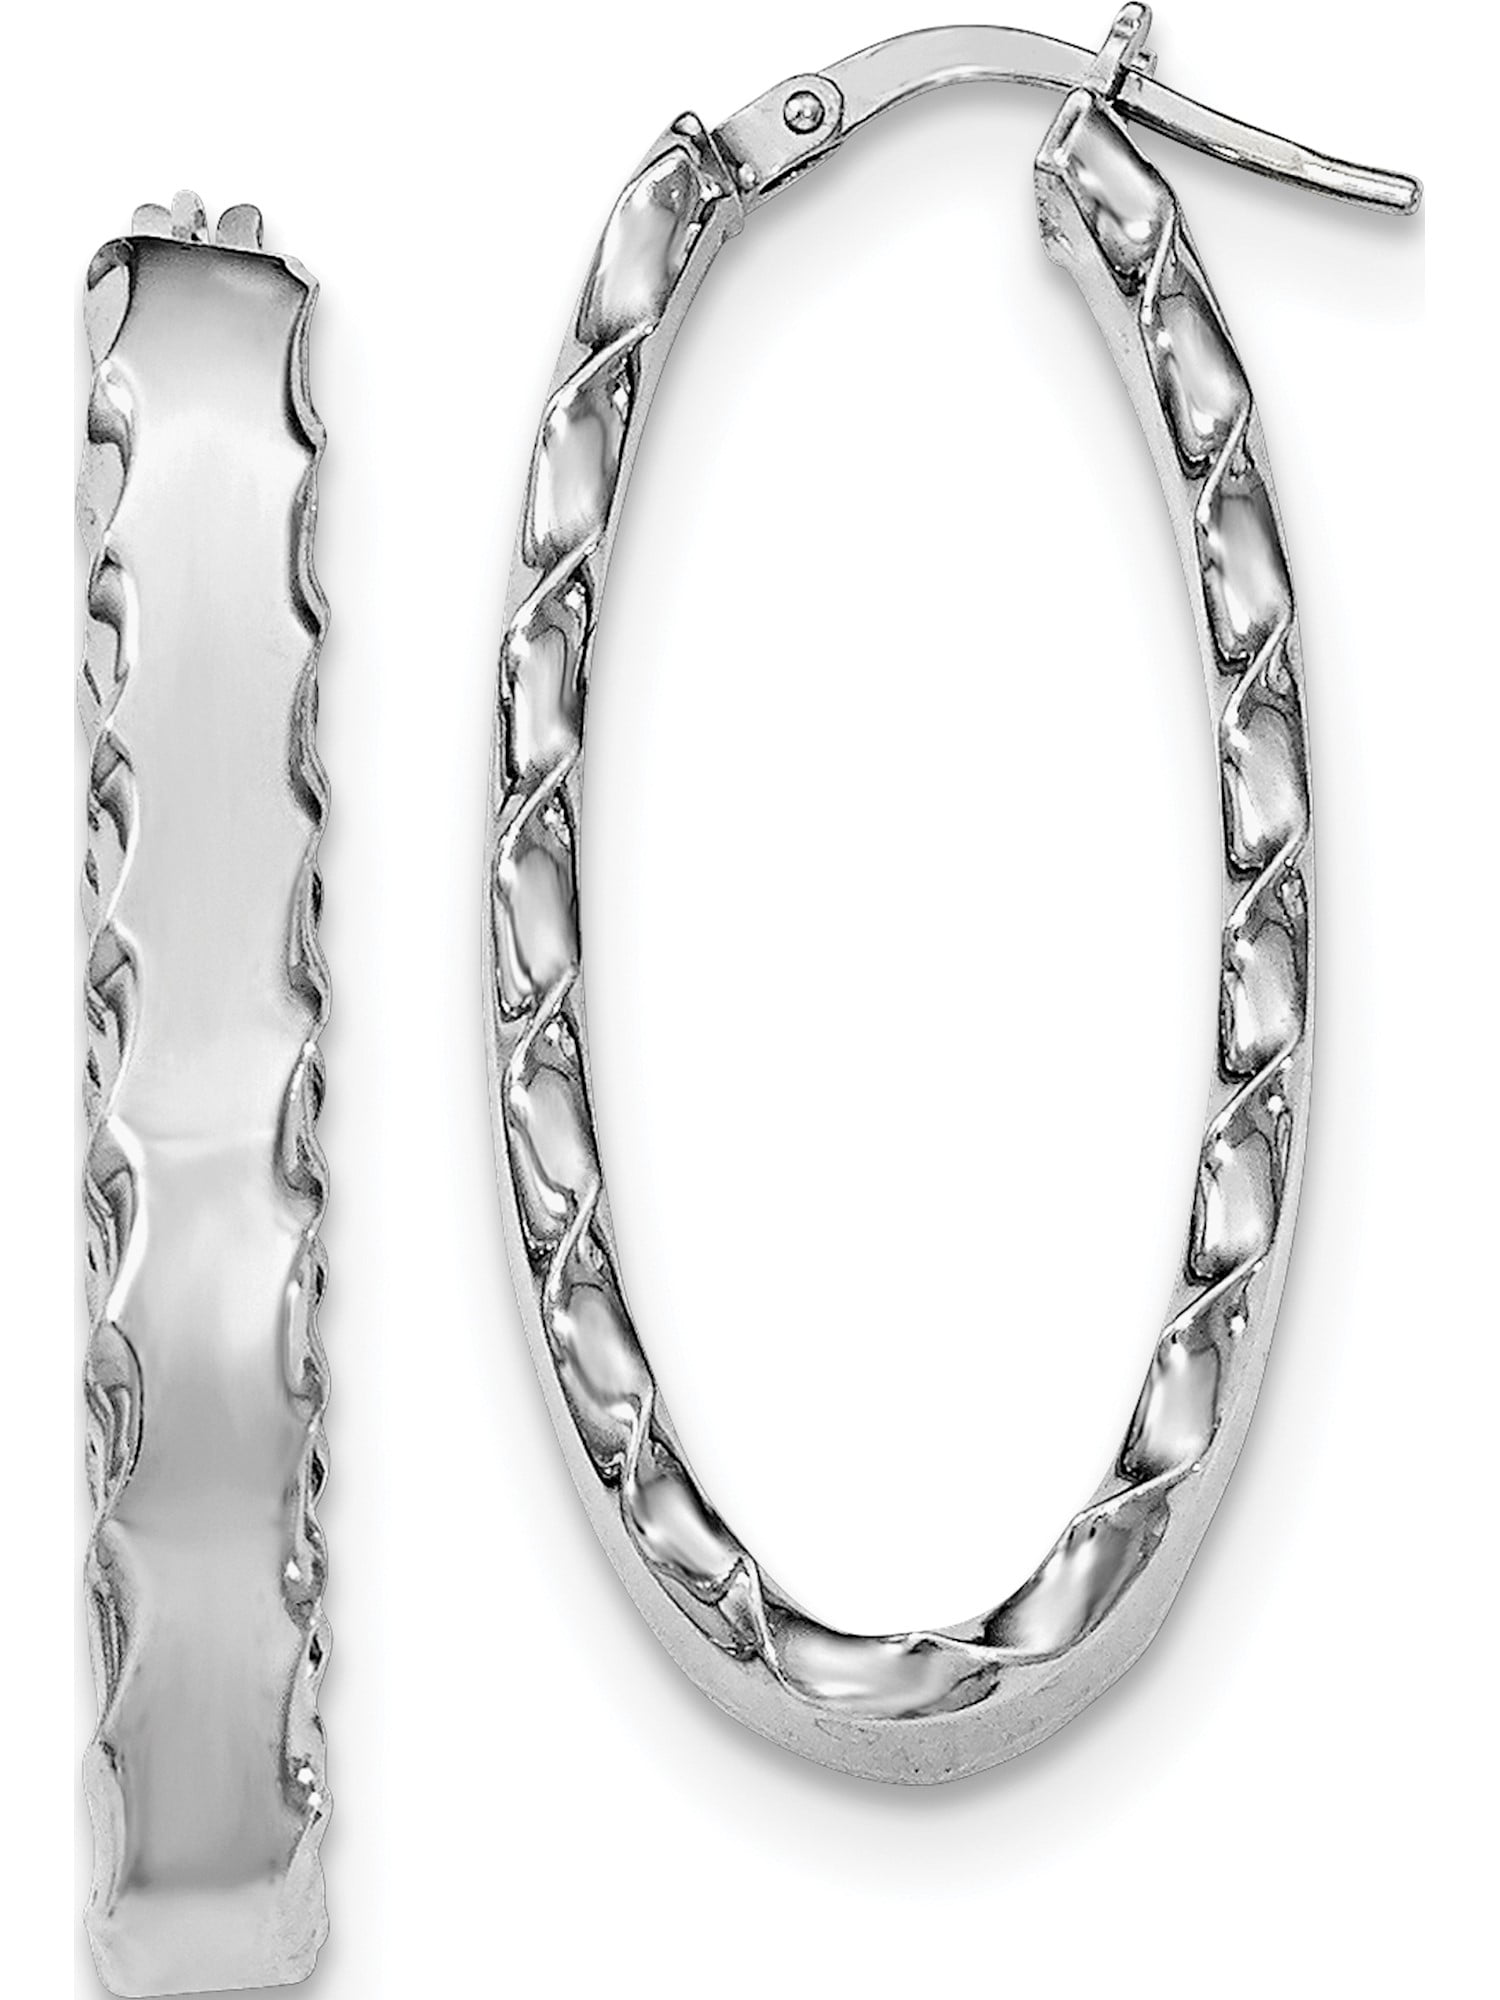 Solid .925 Sterling Silver Rhodium-plated Scalloped Edge Hoop Earrings 37x18mm